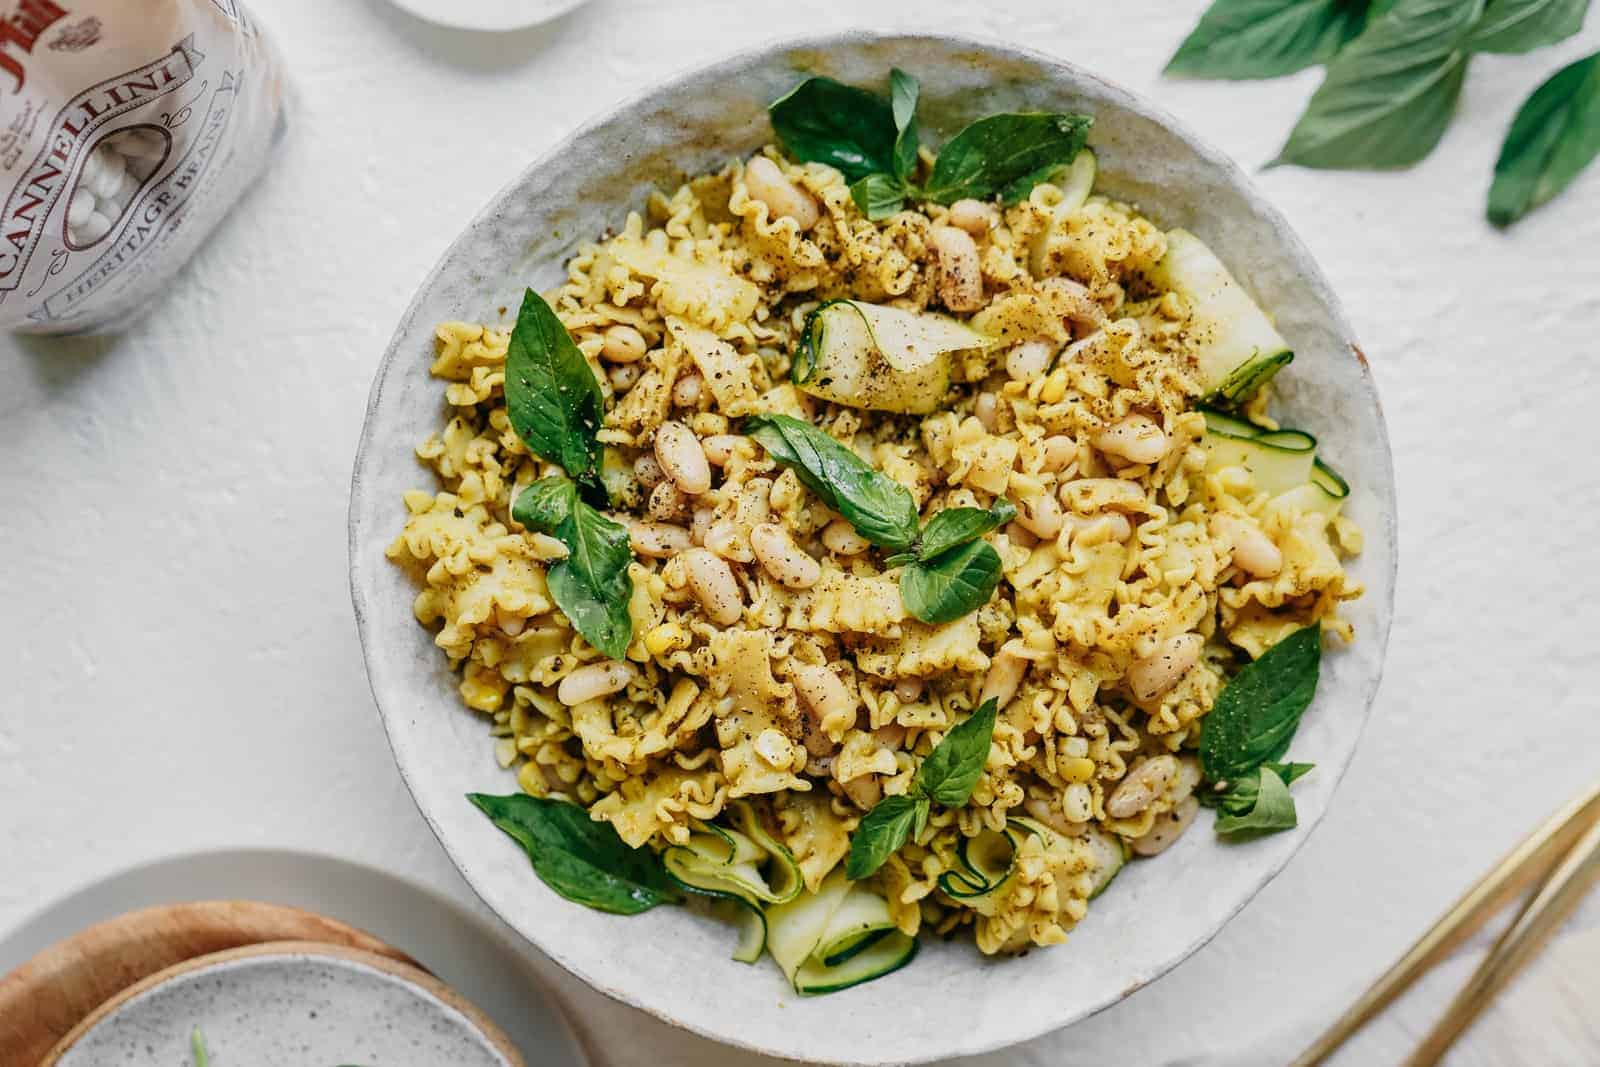 Vegan Pasta recipe that is perfect for your next potluck. Big bowl on white countertop.